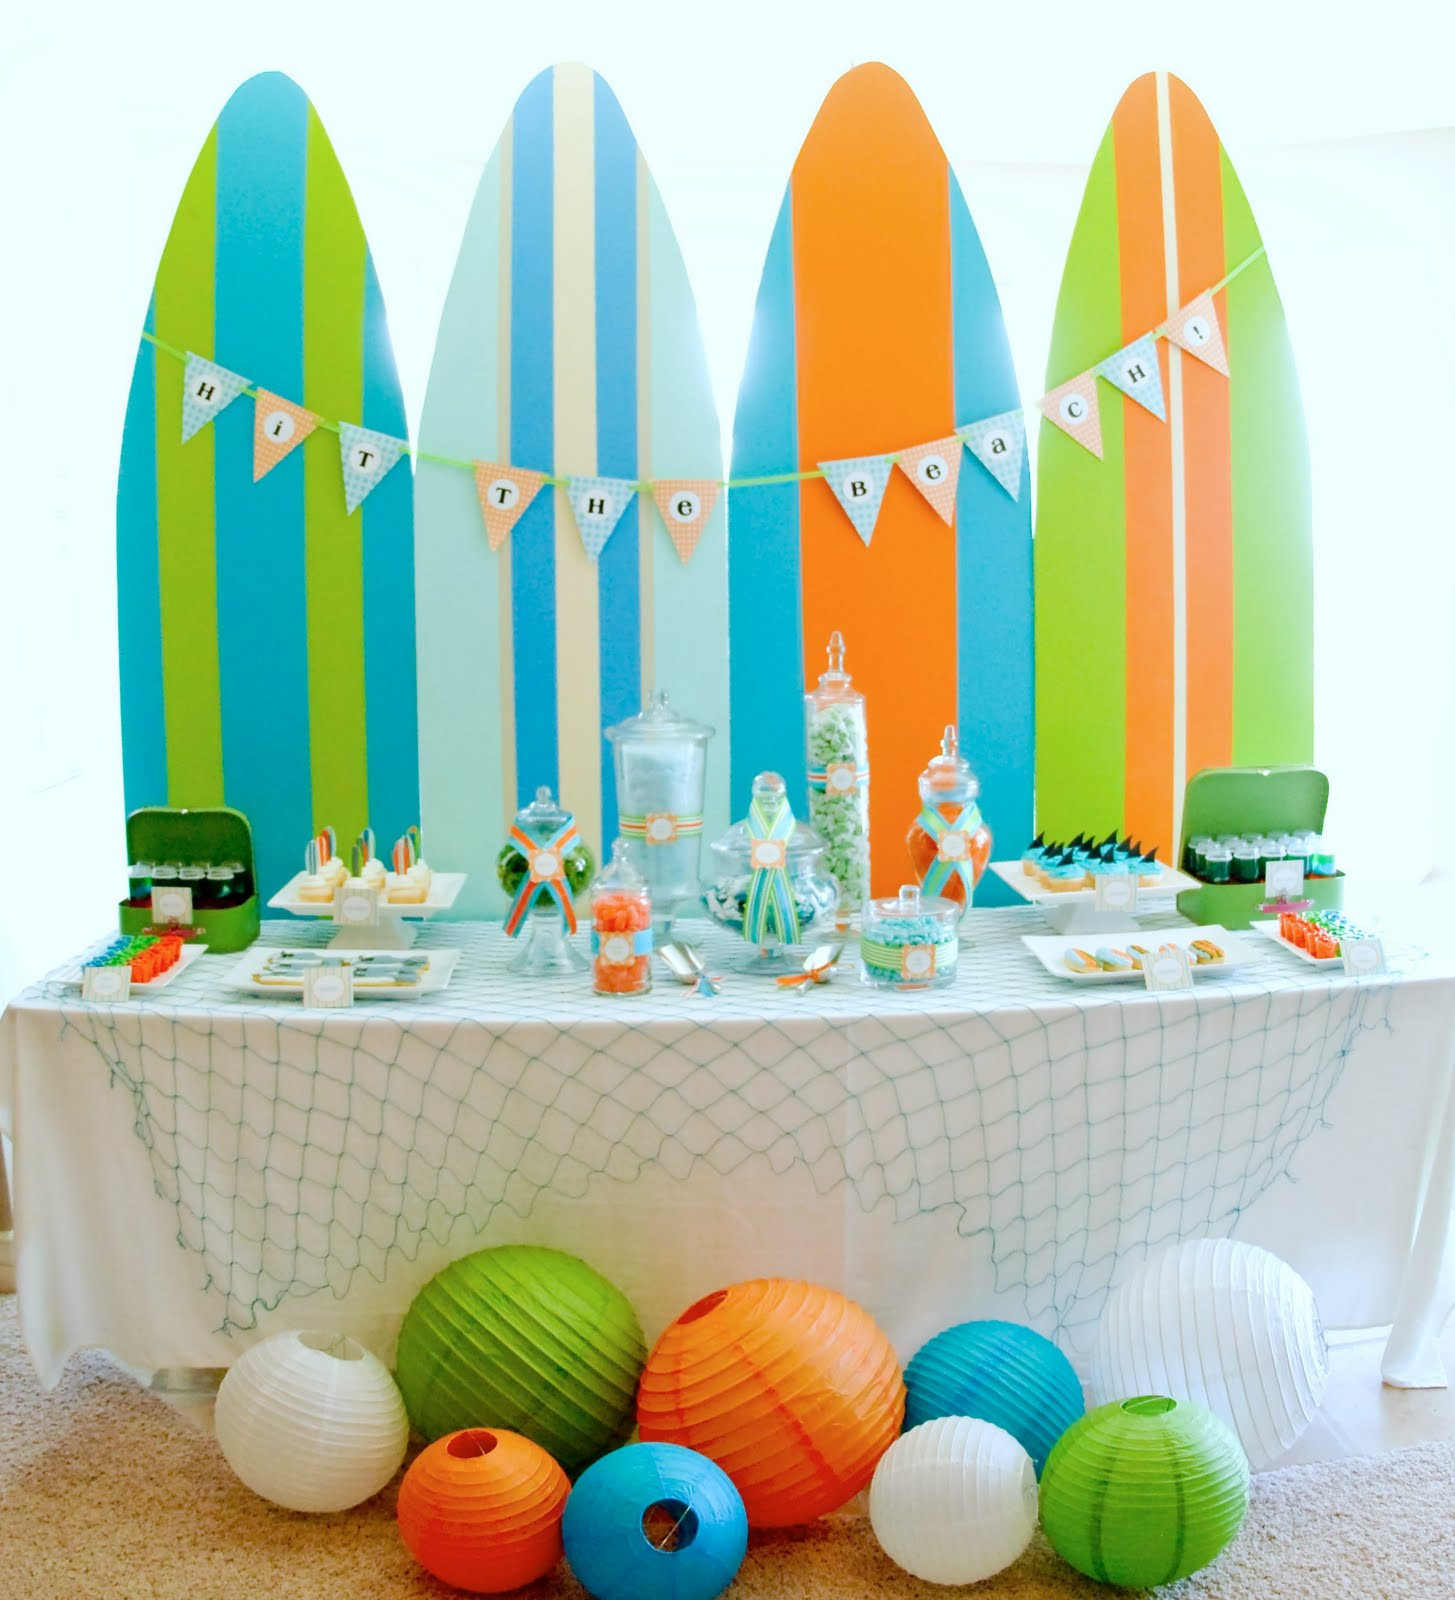 Beach Party Decorating Ideas
 Kara s Party Ideas Surf s Up Summer Pool Party